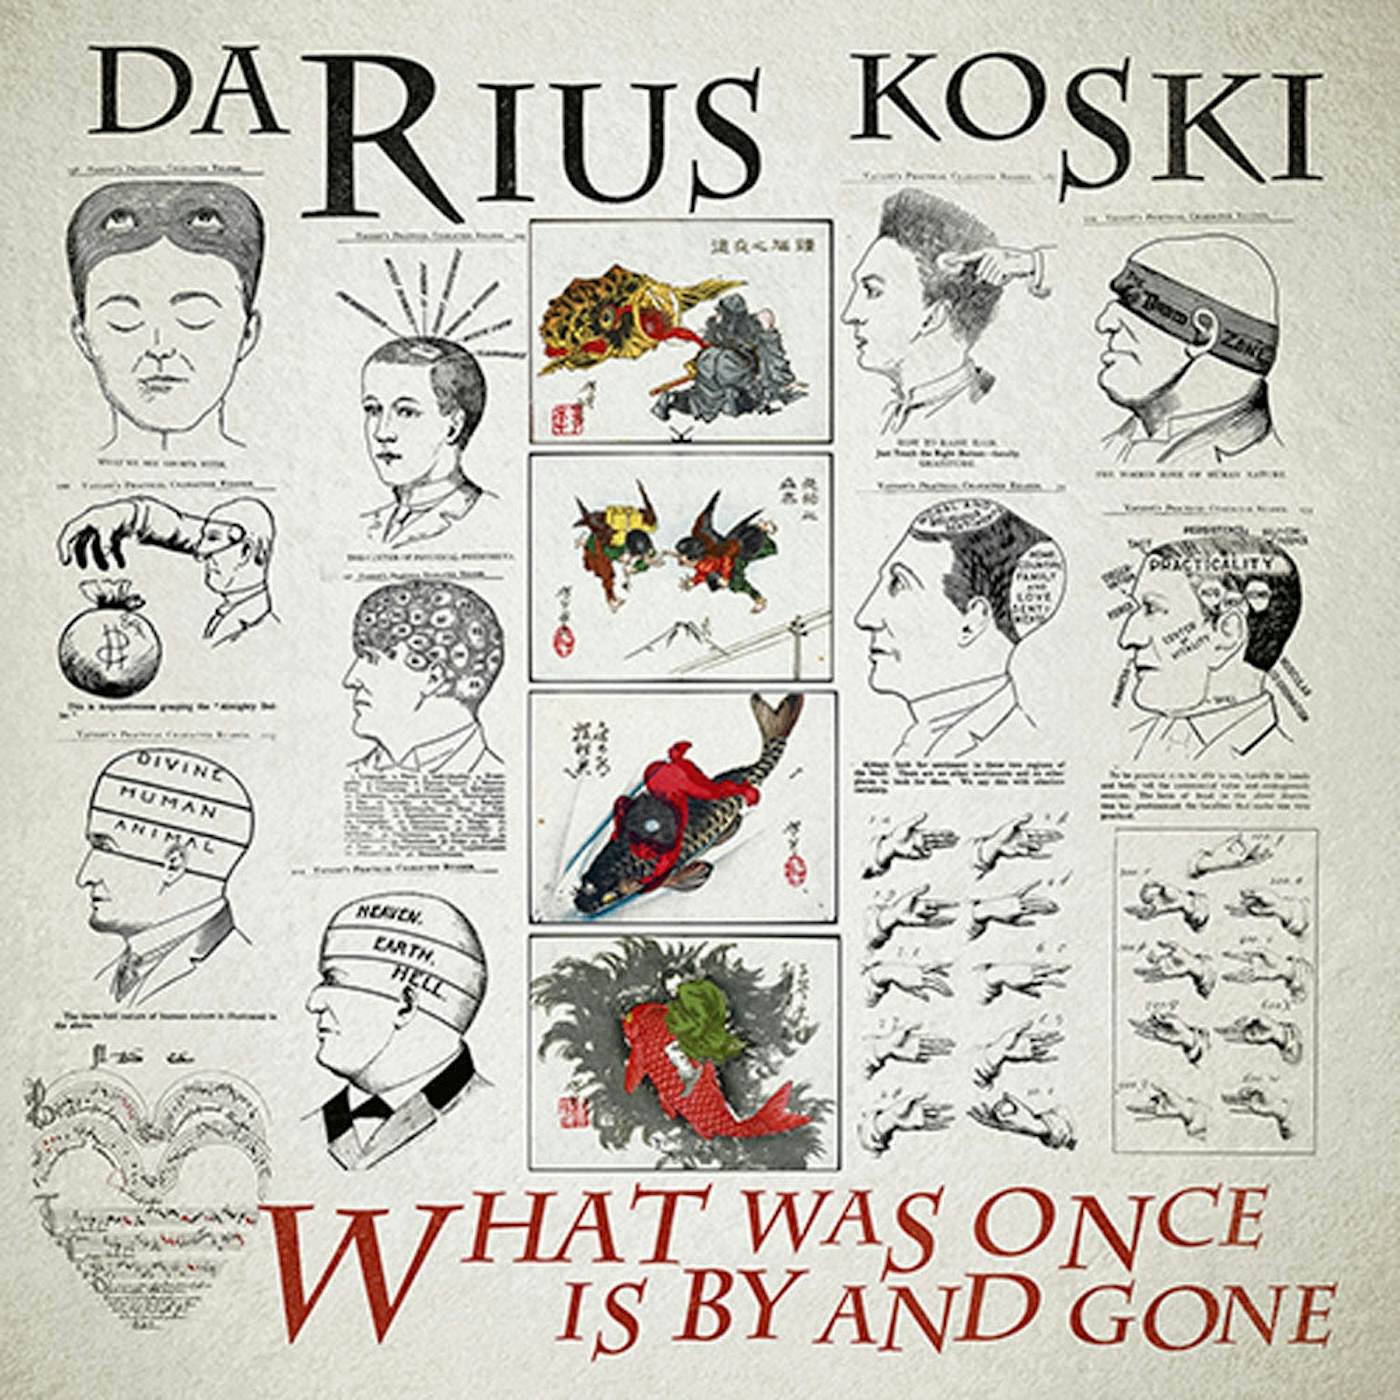  Darius Koski LP - What Was Once Is By And Gone (Vinyl)